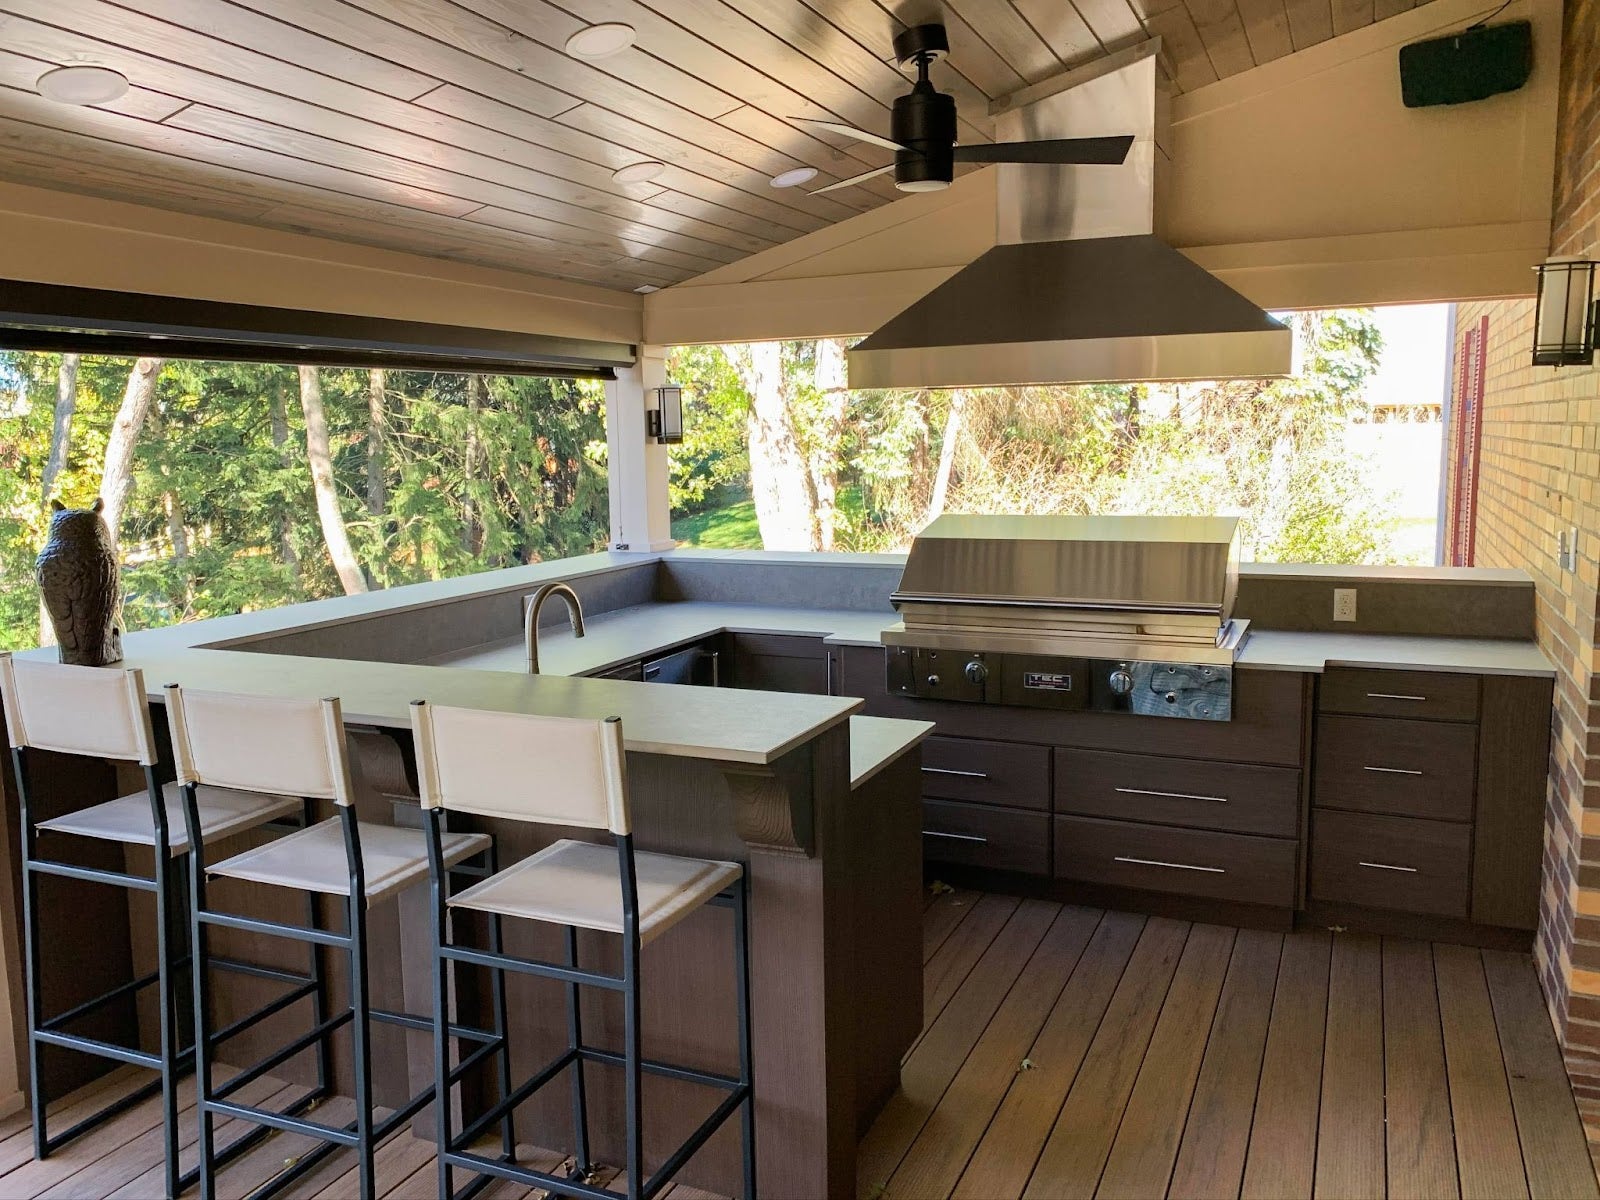 Functional outdoor kitchen featuring a large range hood, stone countertops, and under a covered wooden top with lights. - prolinerangehoods.com